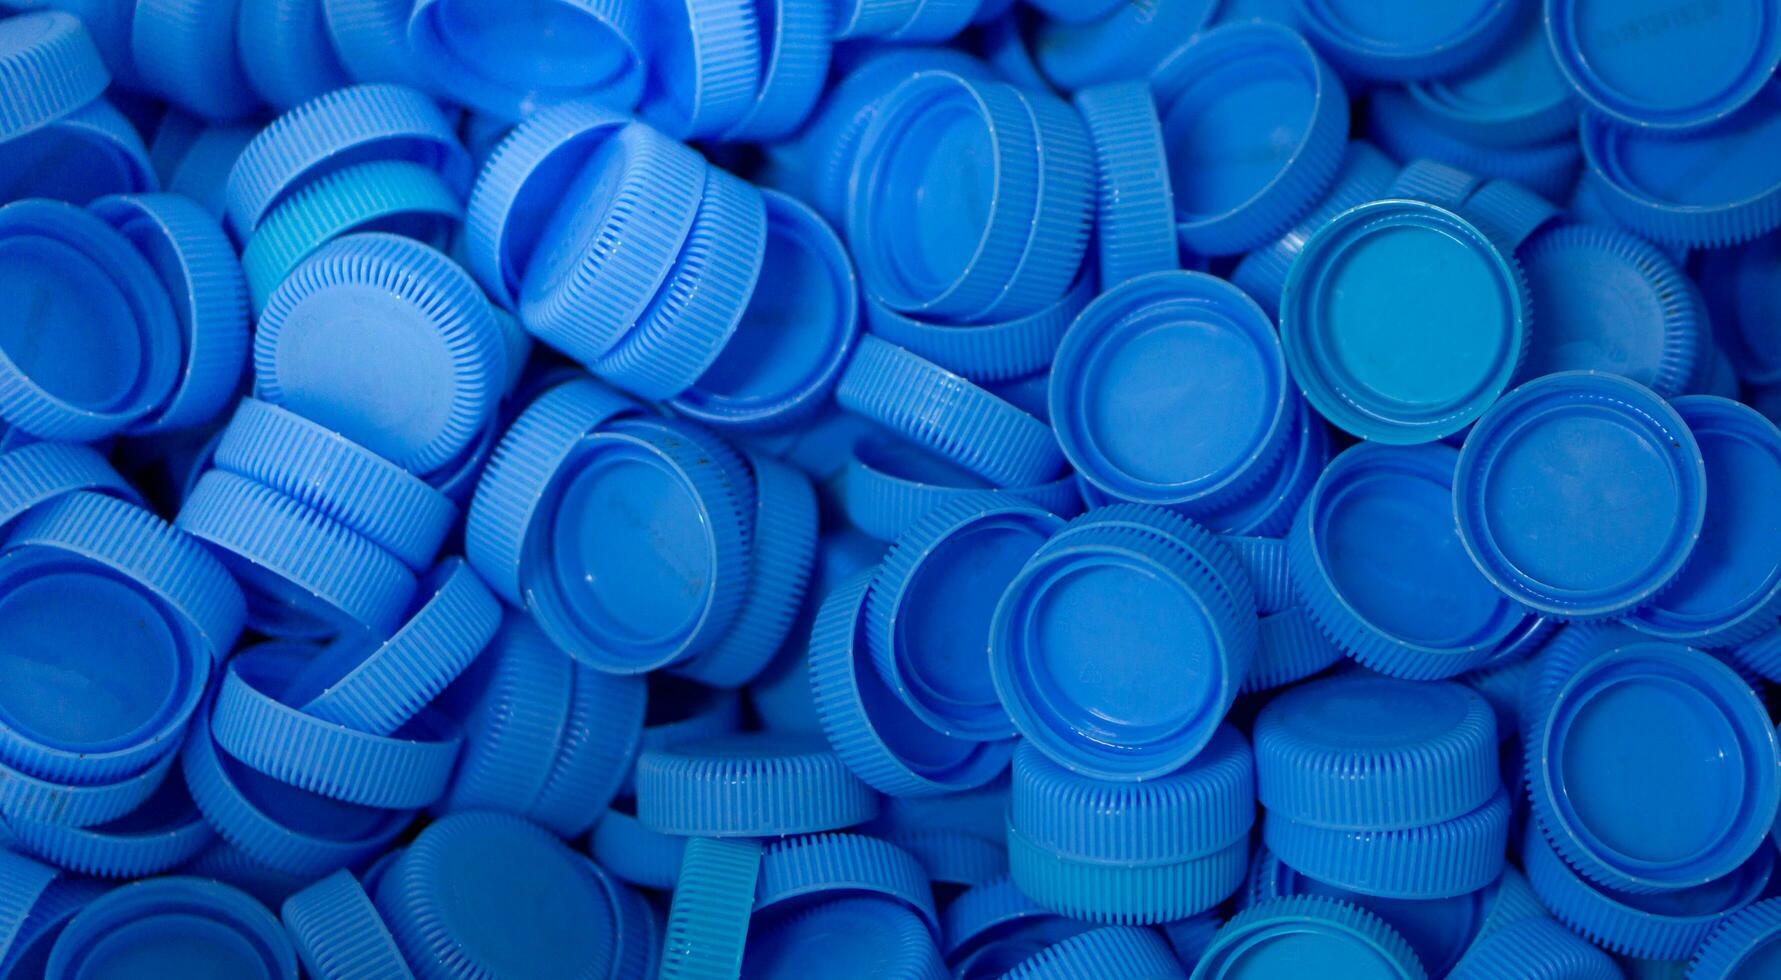 The plastic lid that is left over from the bottles are collected to be recycled into other items for reuse. photo